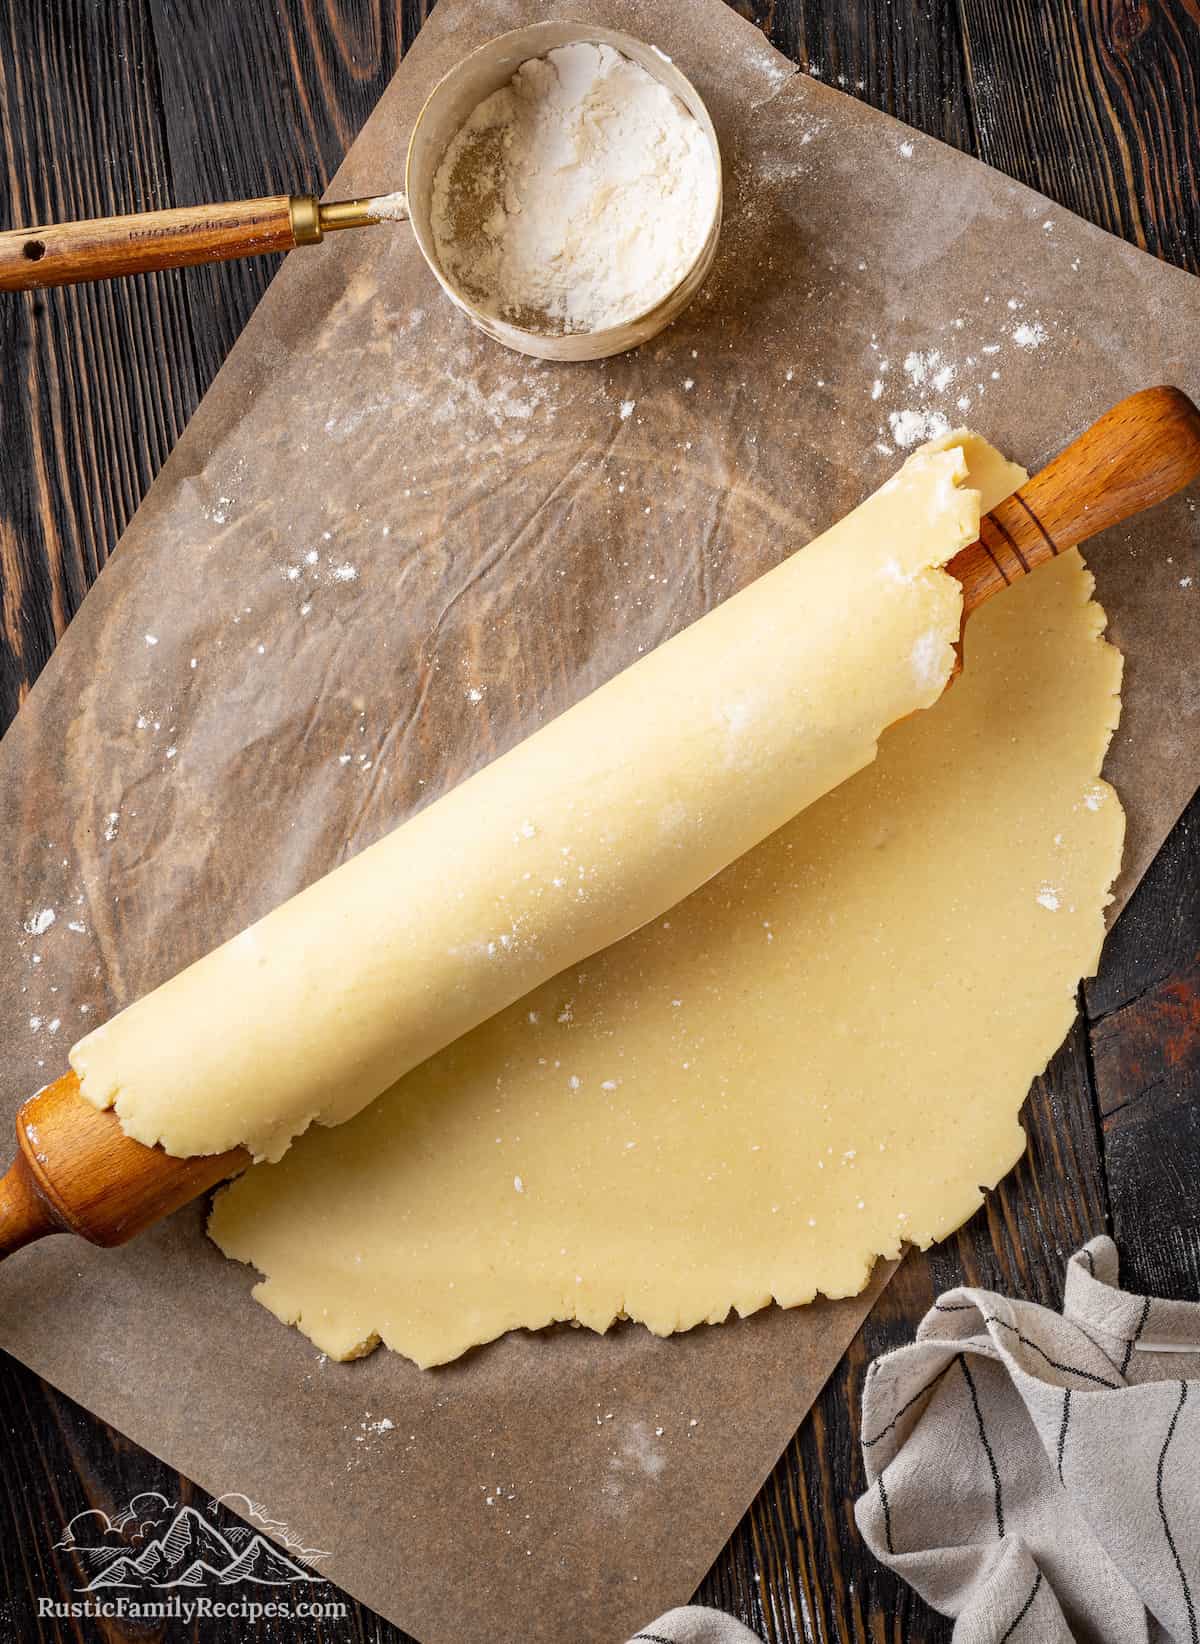 Pie crust dough wrapped around a wooden rolling pin on a floured surface.